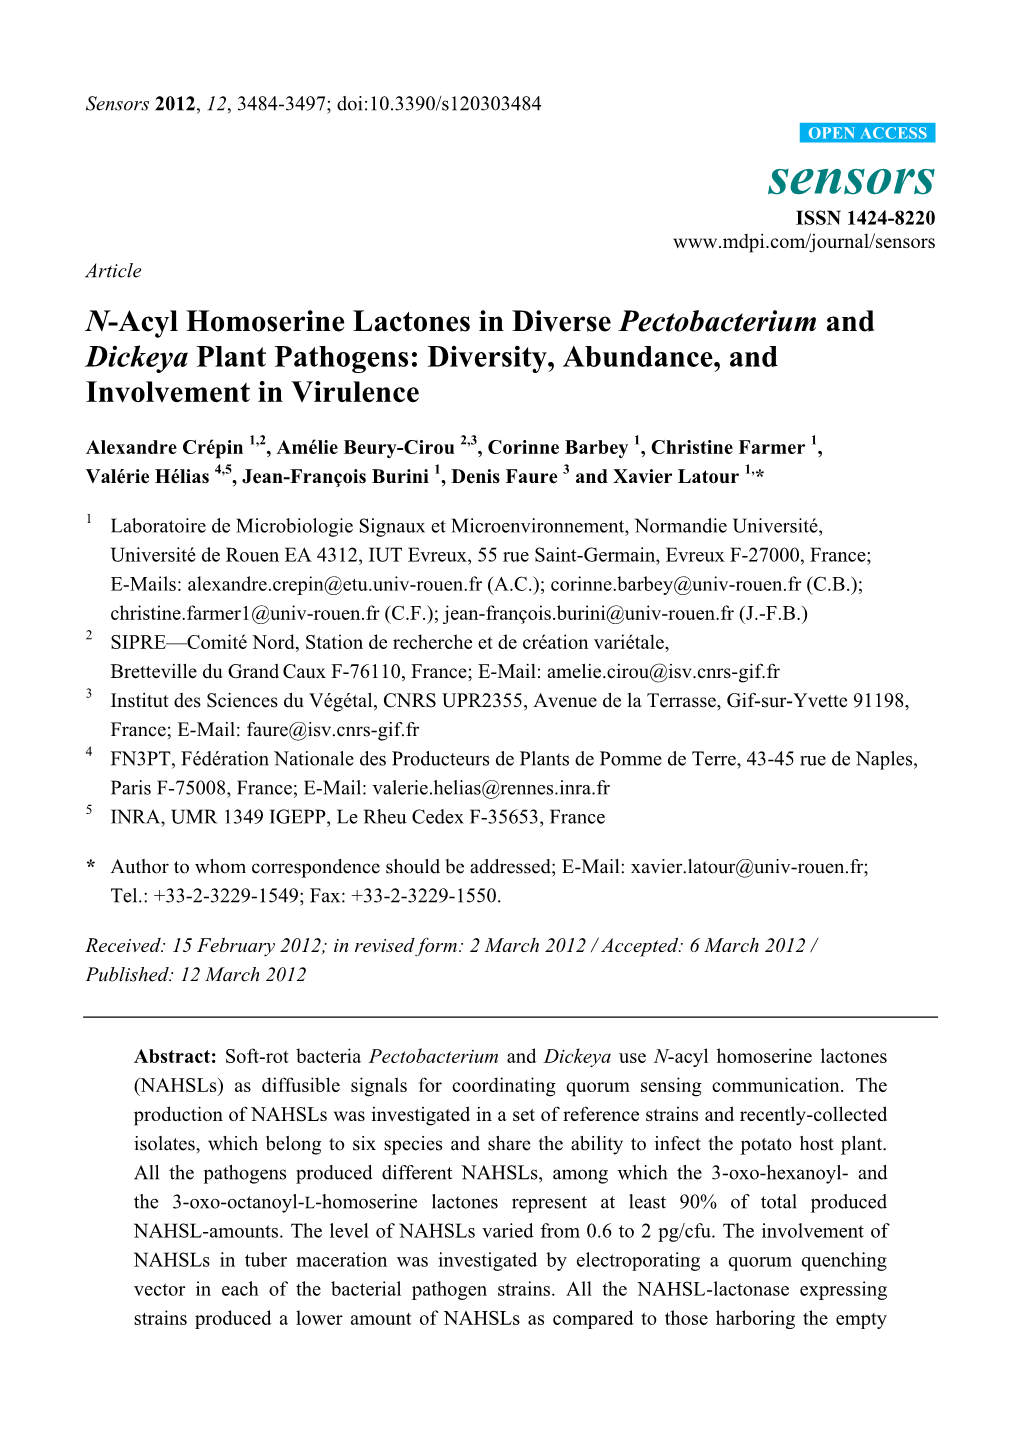 N-Acyl Homoserine Lactones in Diverse Pectobacterium and Dickeya Plant Pathogens: Diversity, Abundance, and Involvement in Virulence